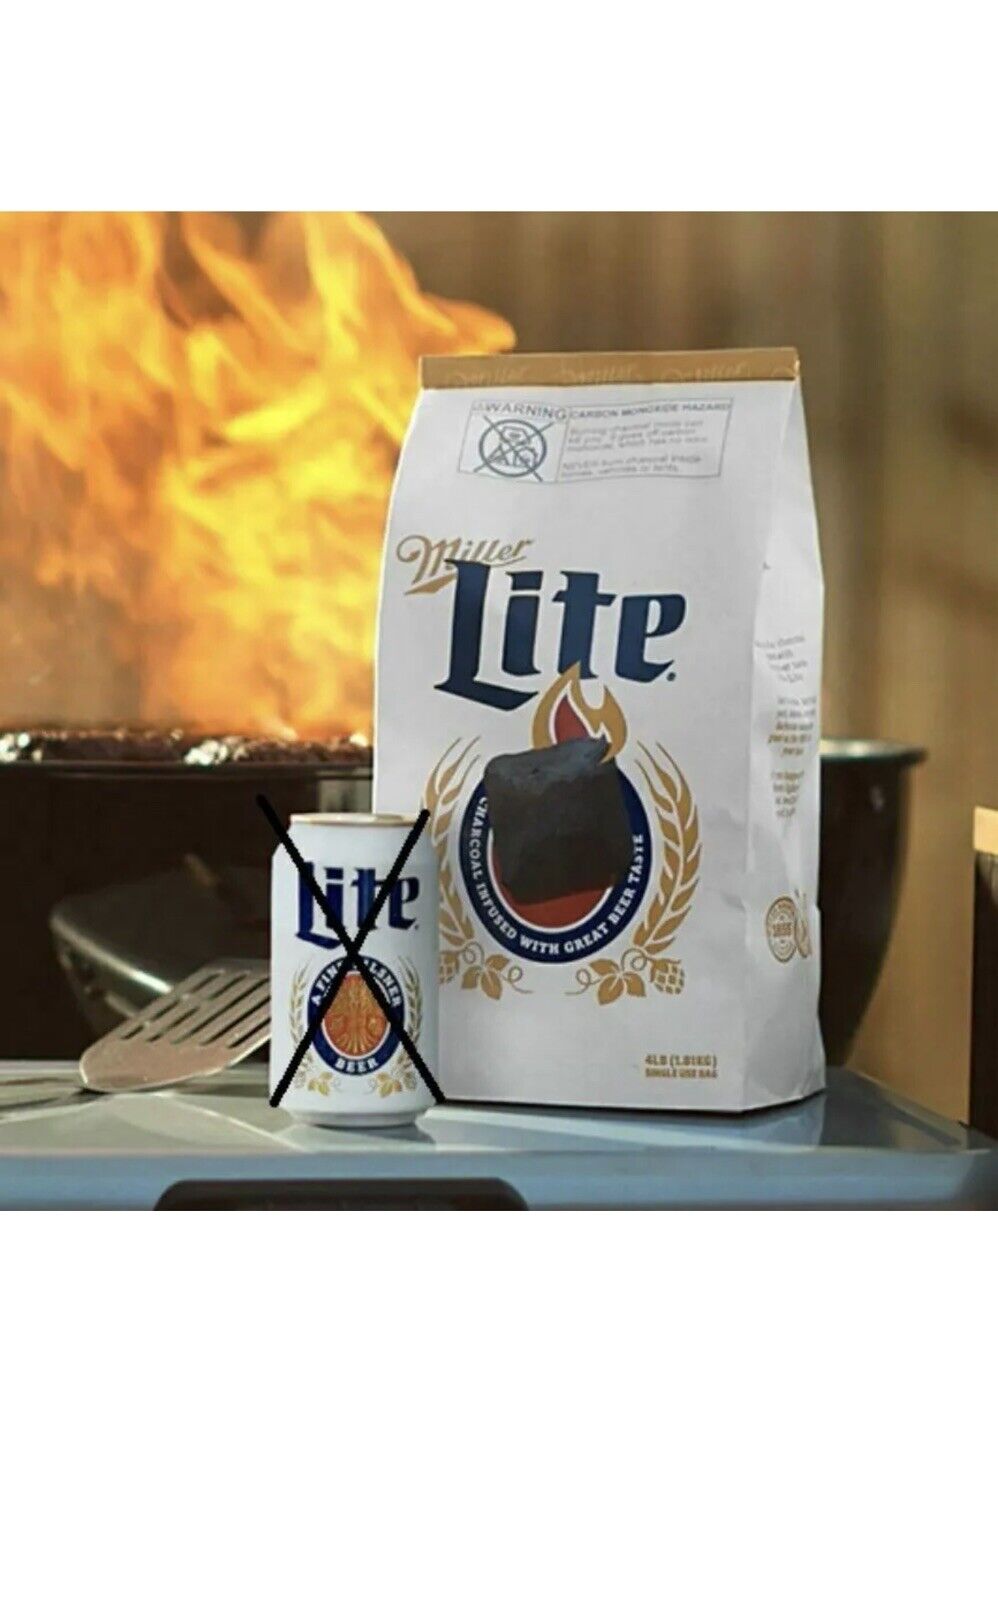 Miller Lite Charcoal Beercoal -Limited Release - Sold Out Online